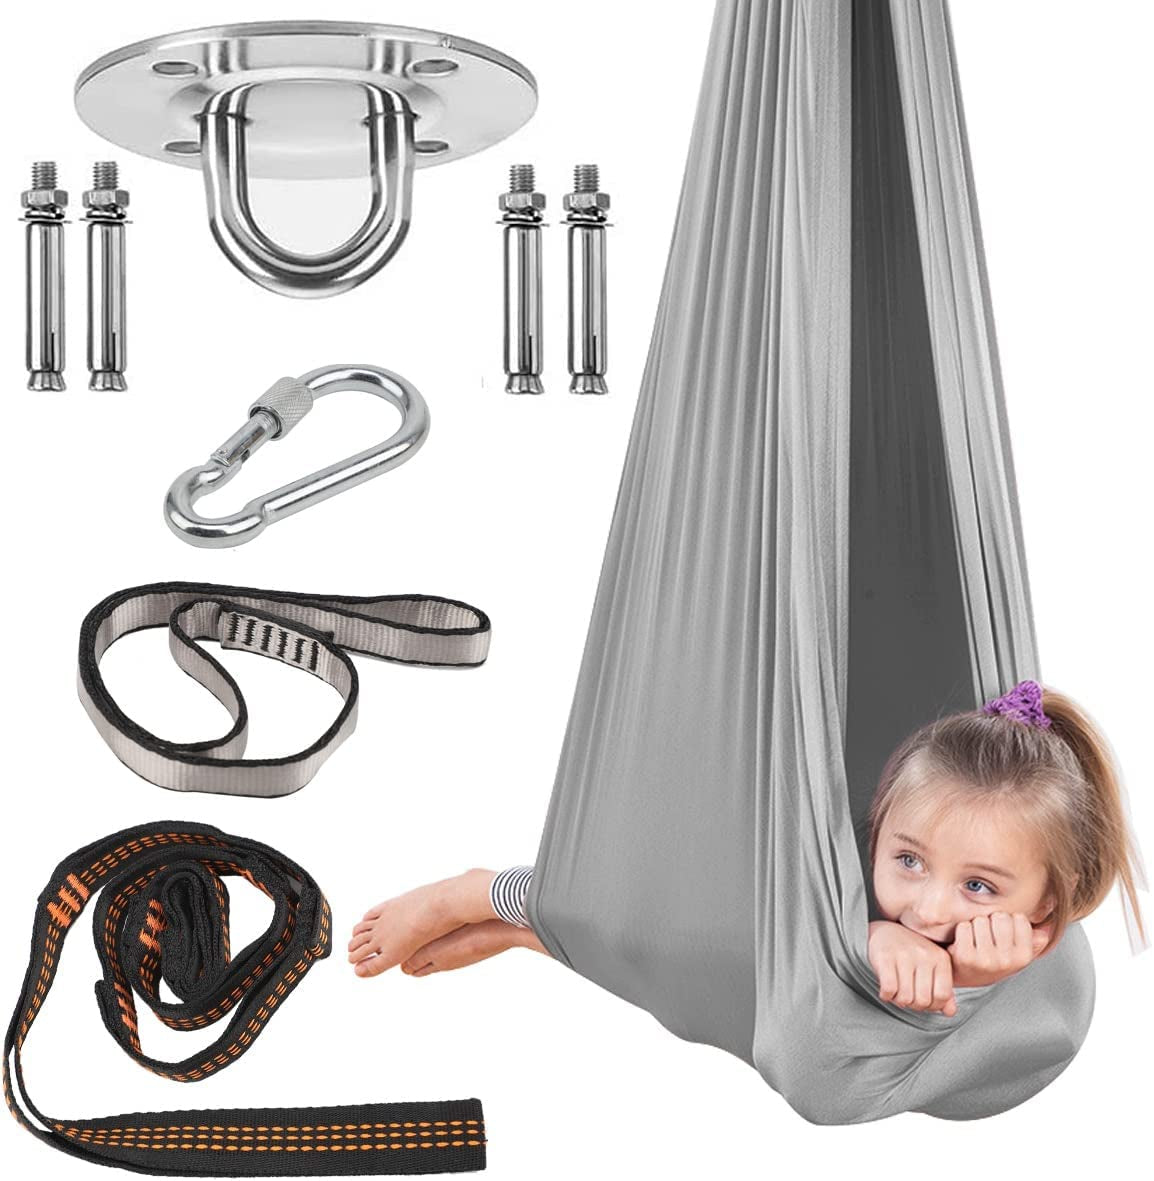 LHHL, LHHL Sensory Therapy Swing Sensory Swing for Adults Indoor Therapy Swing for Kids with Special Needs 440 Lbs for Autism, ADHD, Aspergers and Sensory